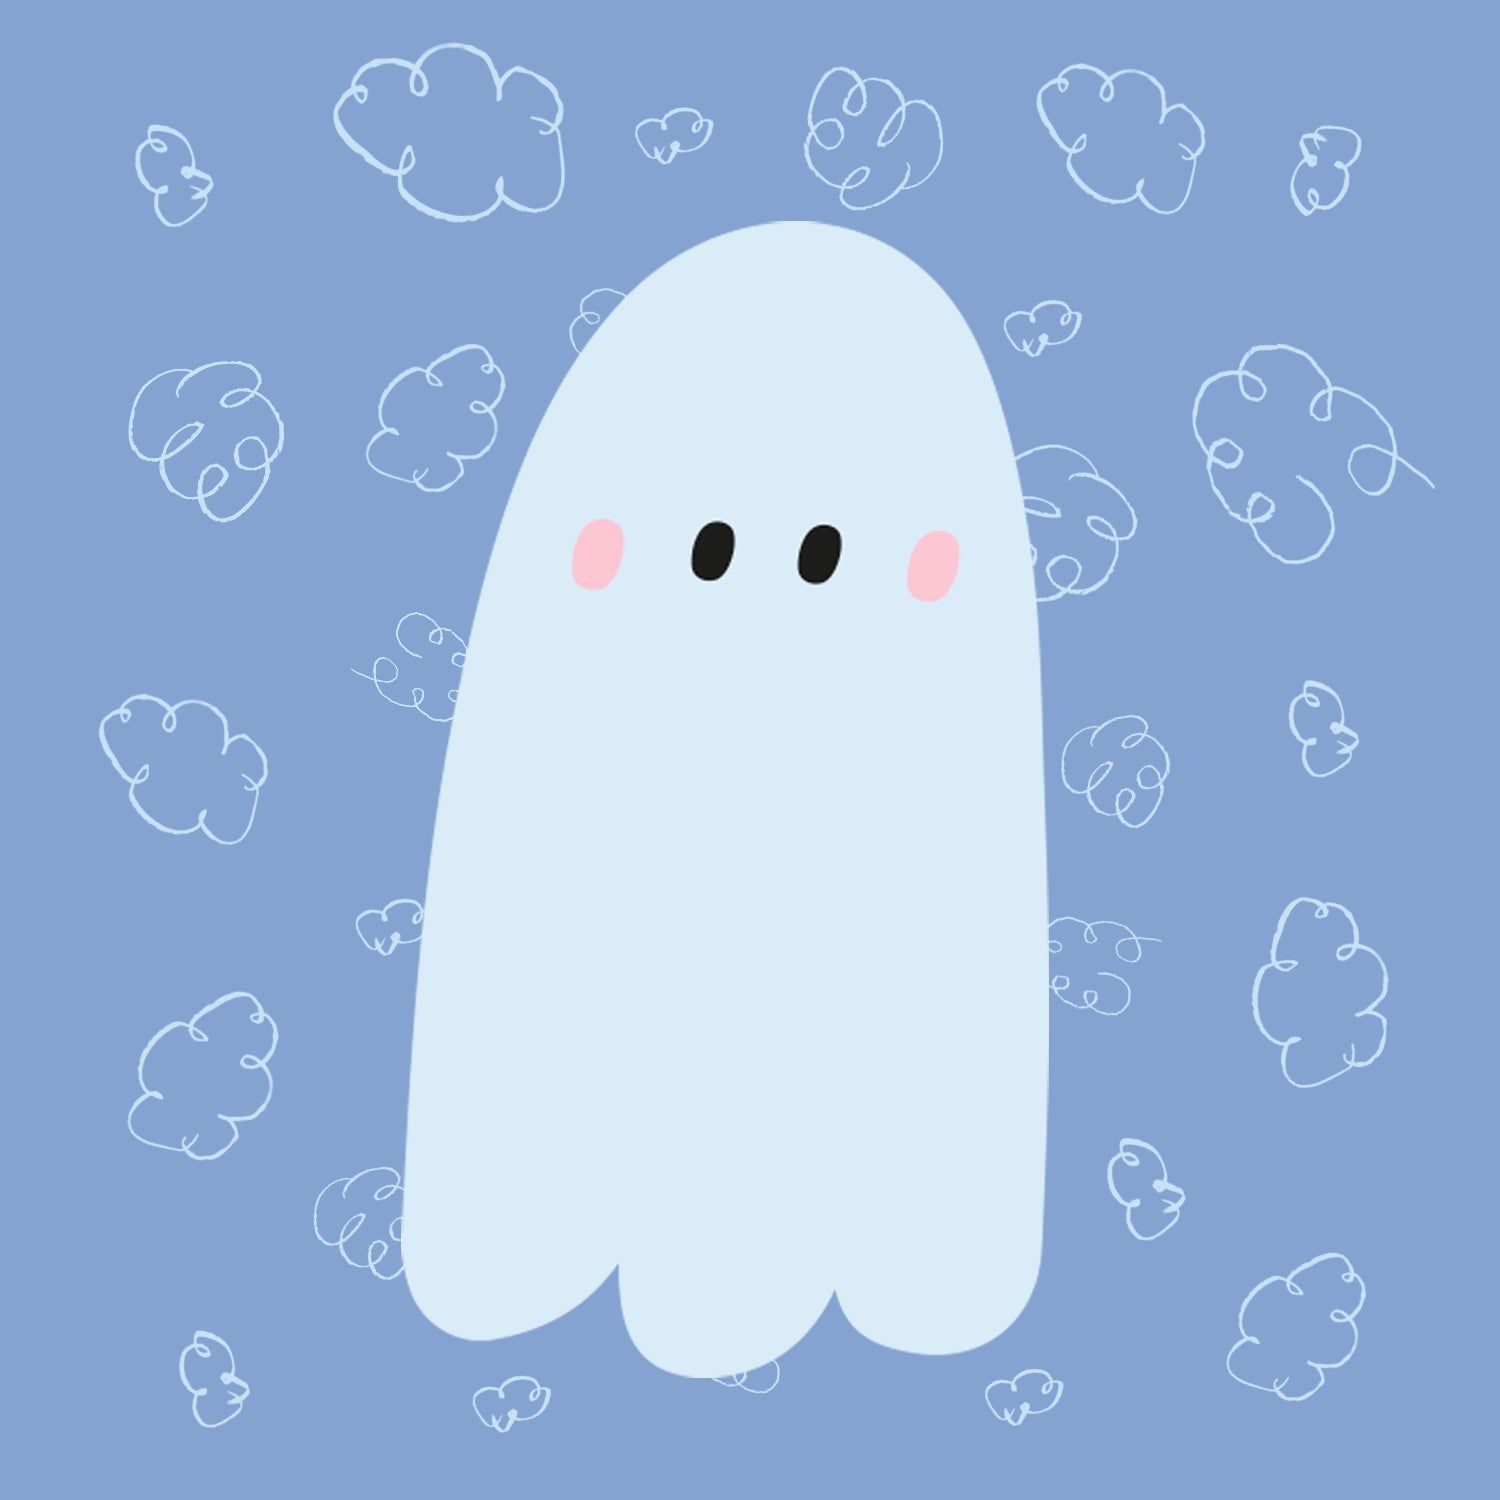 ghost illustration playing Halloween game for kids